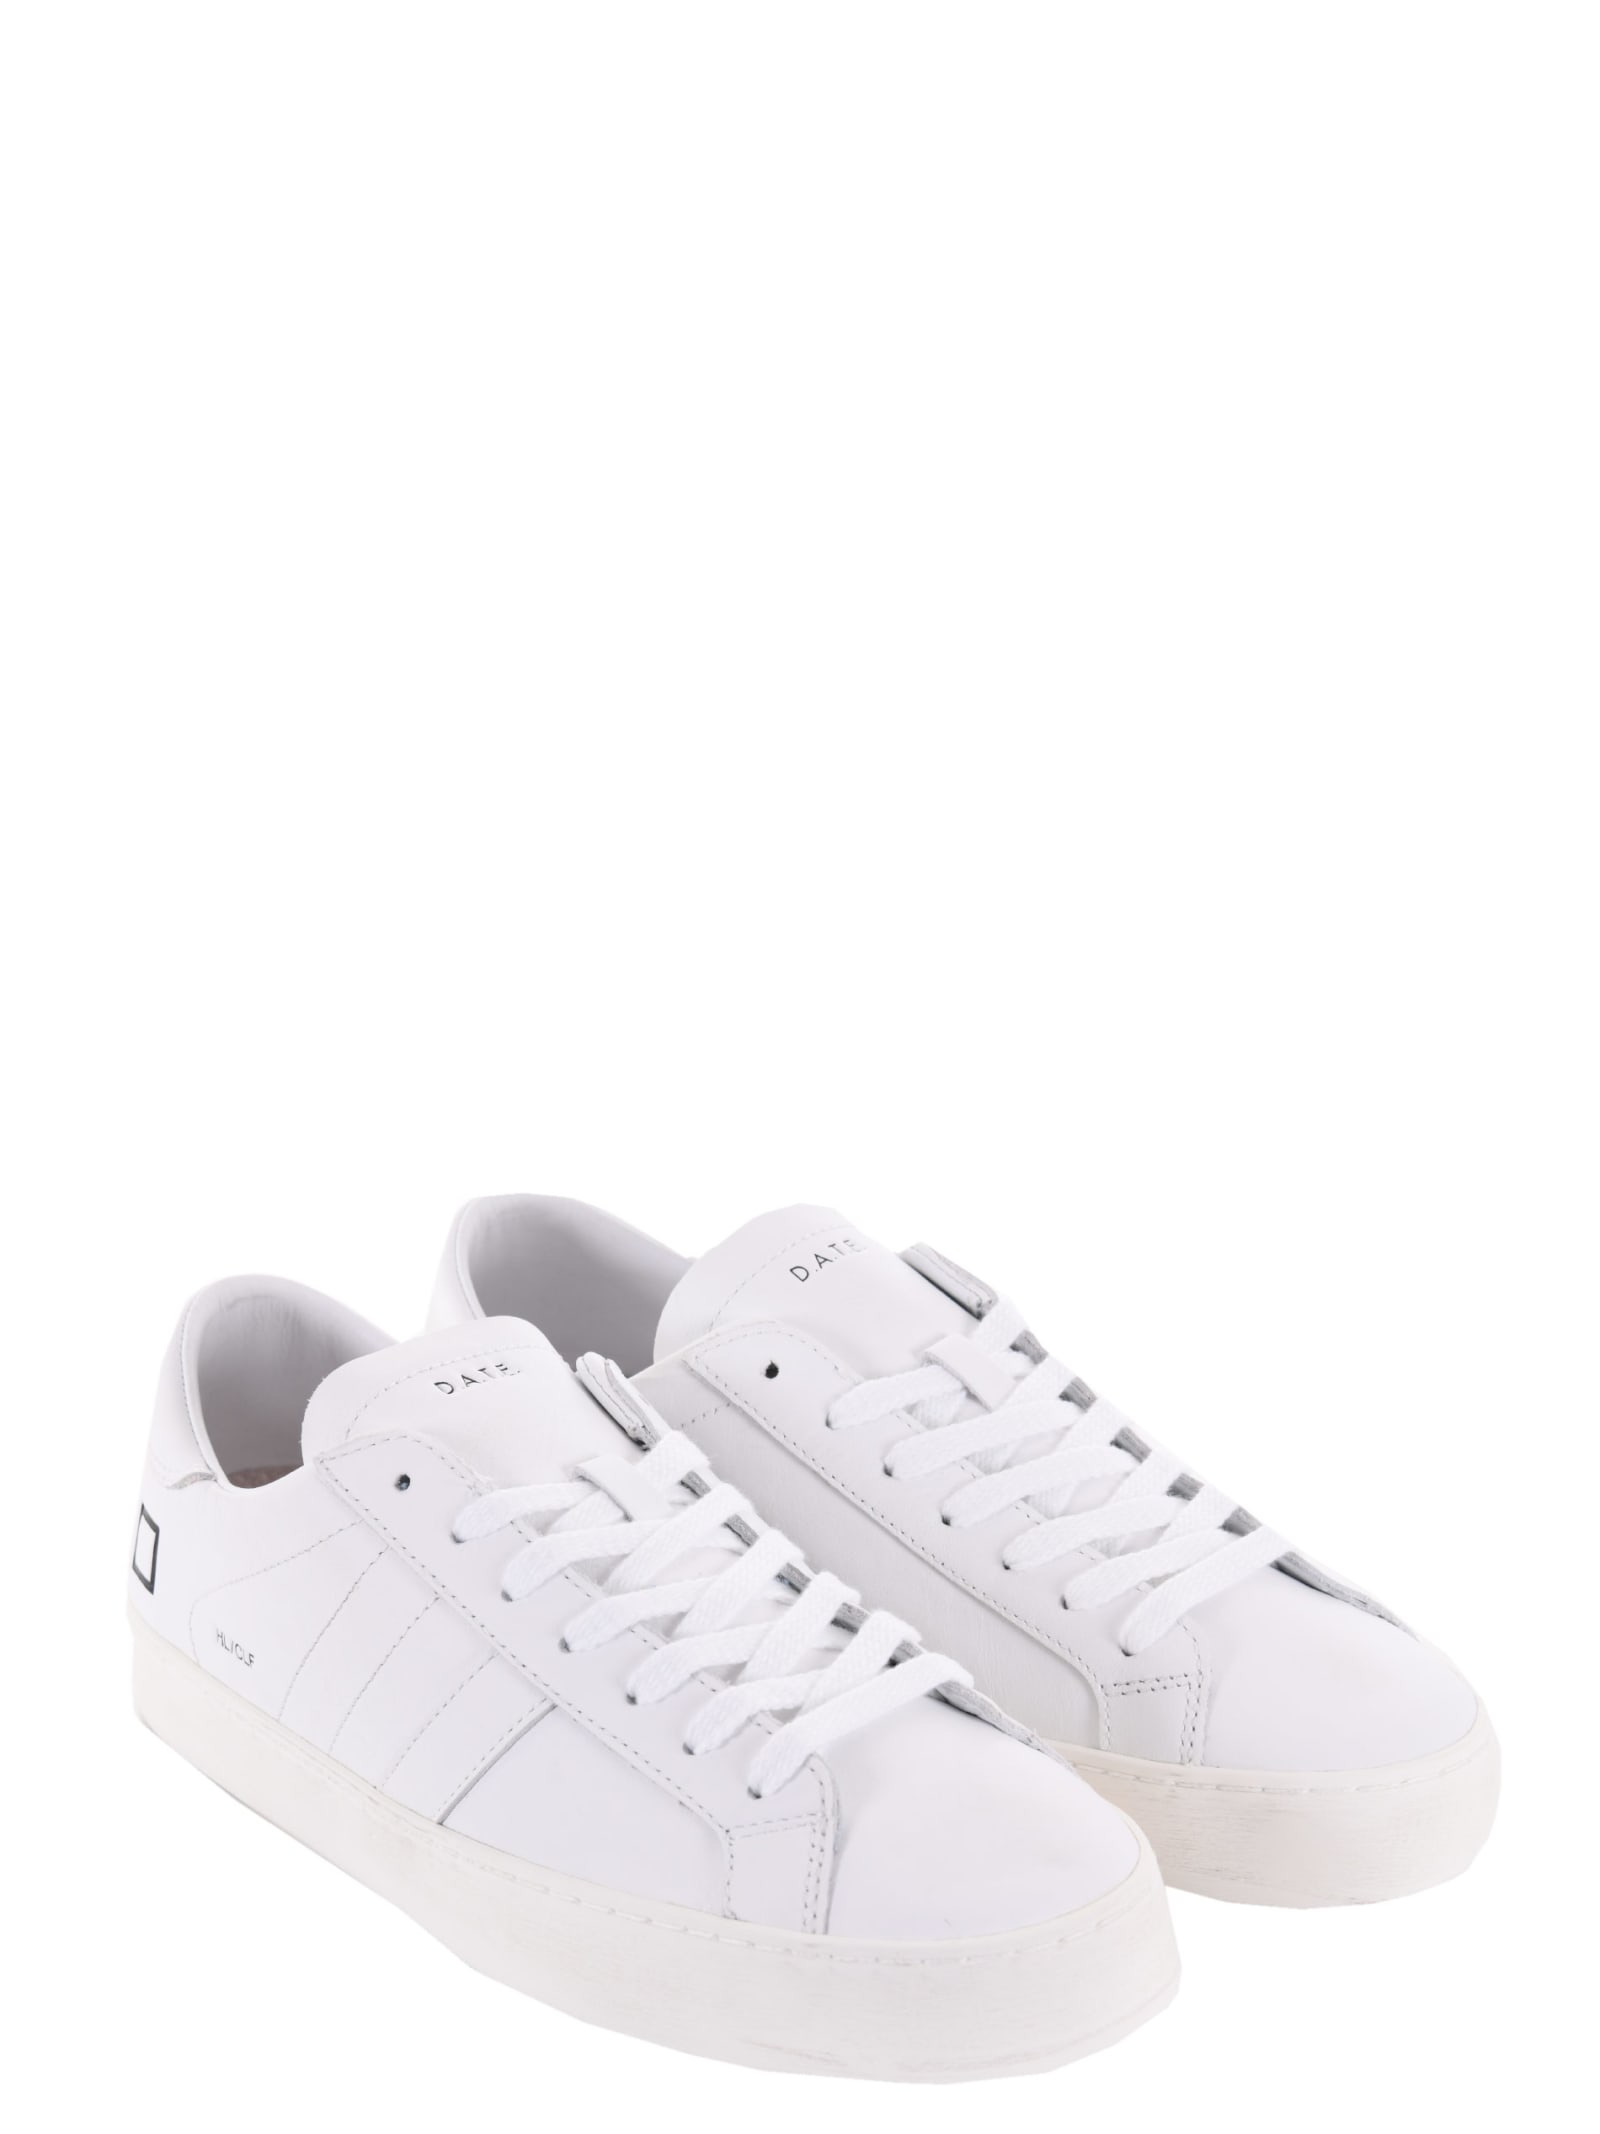 Shop Date D.a.t.e. Mens Sneakers In Leather In White